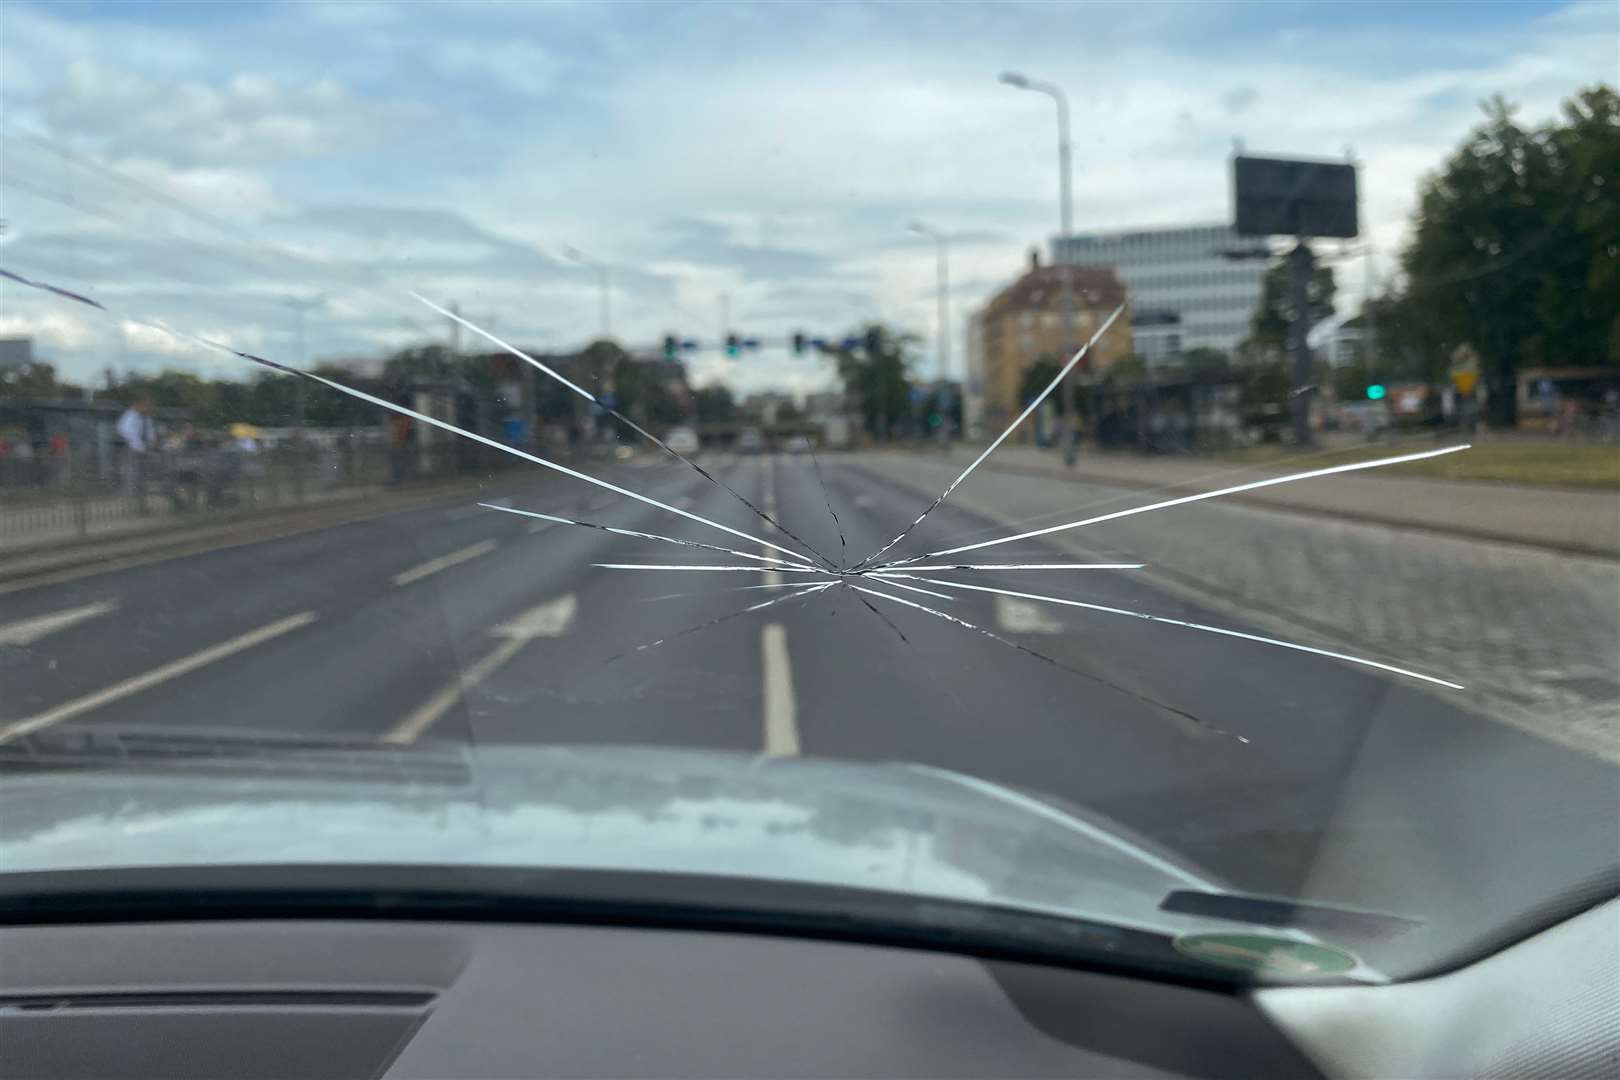 Windscreen technology may mean repairs run into hundreds of pounds. Image: iStock.